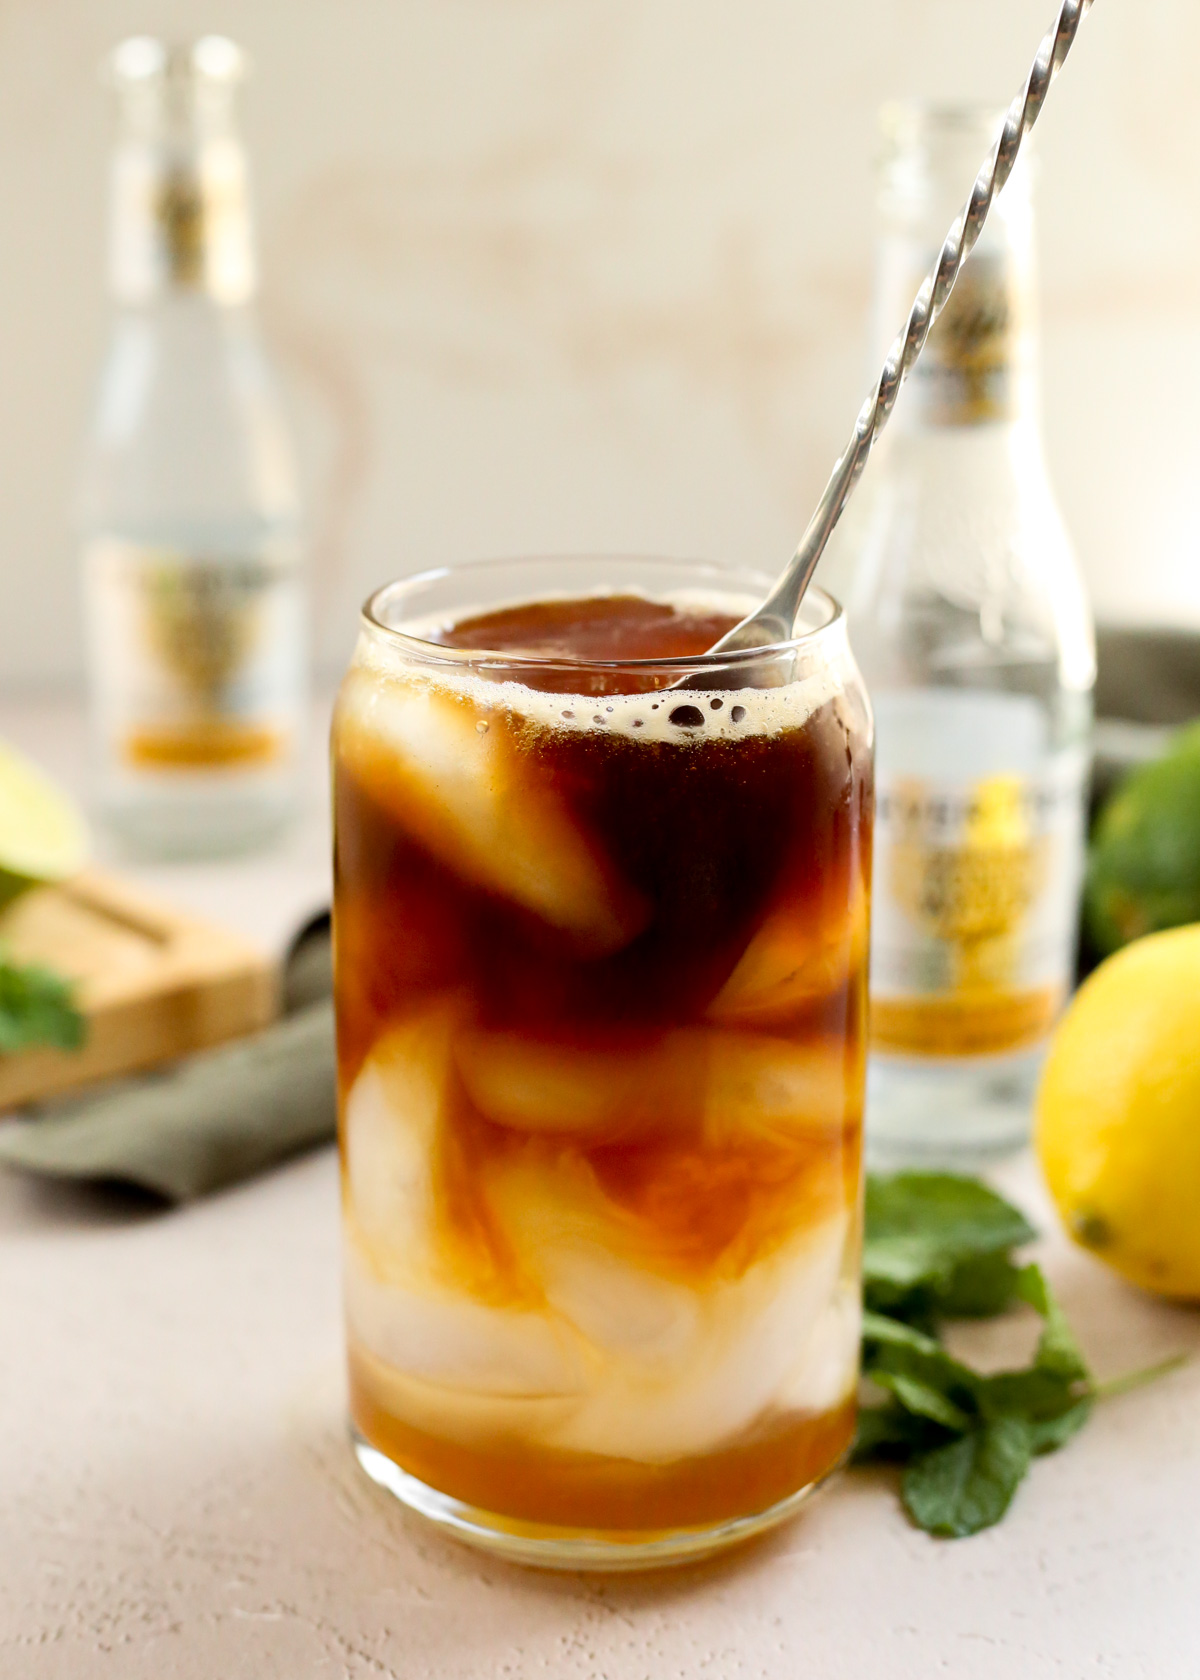 A refreshing summer coffee drink in a clear glass, with layers of yuzu puree on the bottom, tonic water, and espresso with ice cubes, and a cocktail stirrer resting in the glass as if about to break up the layers with mixing